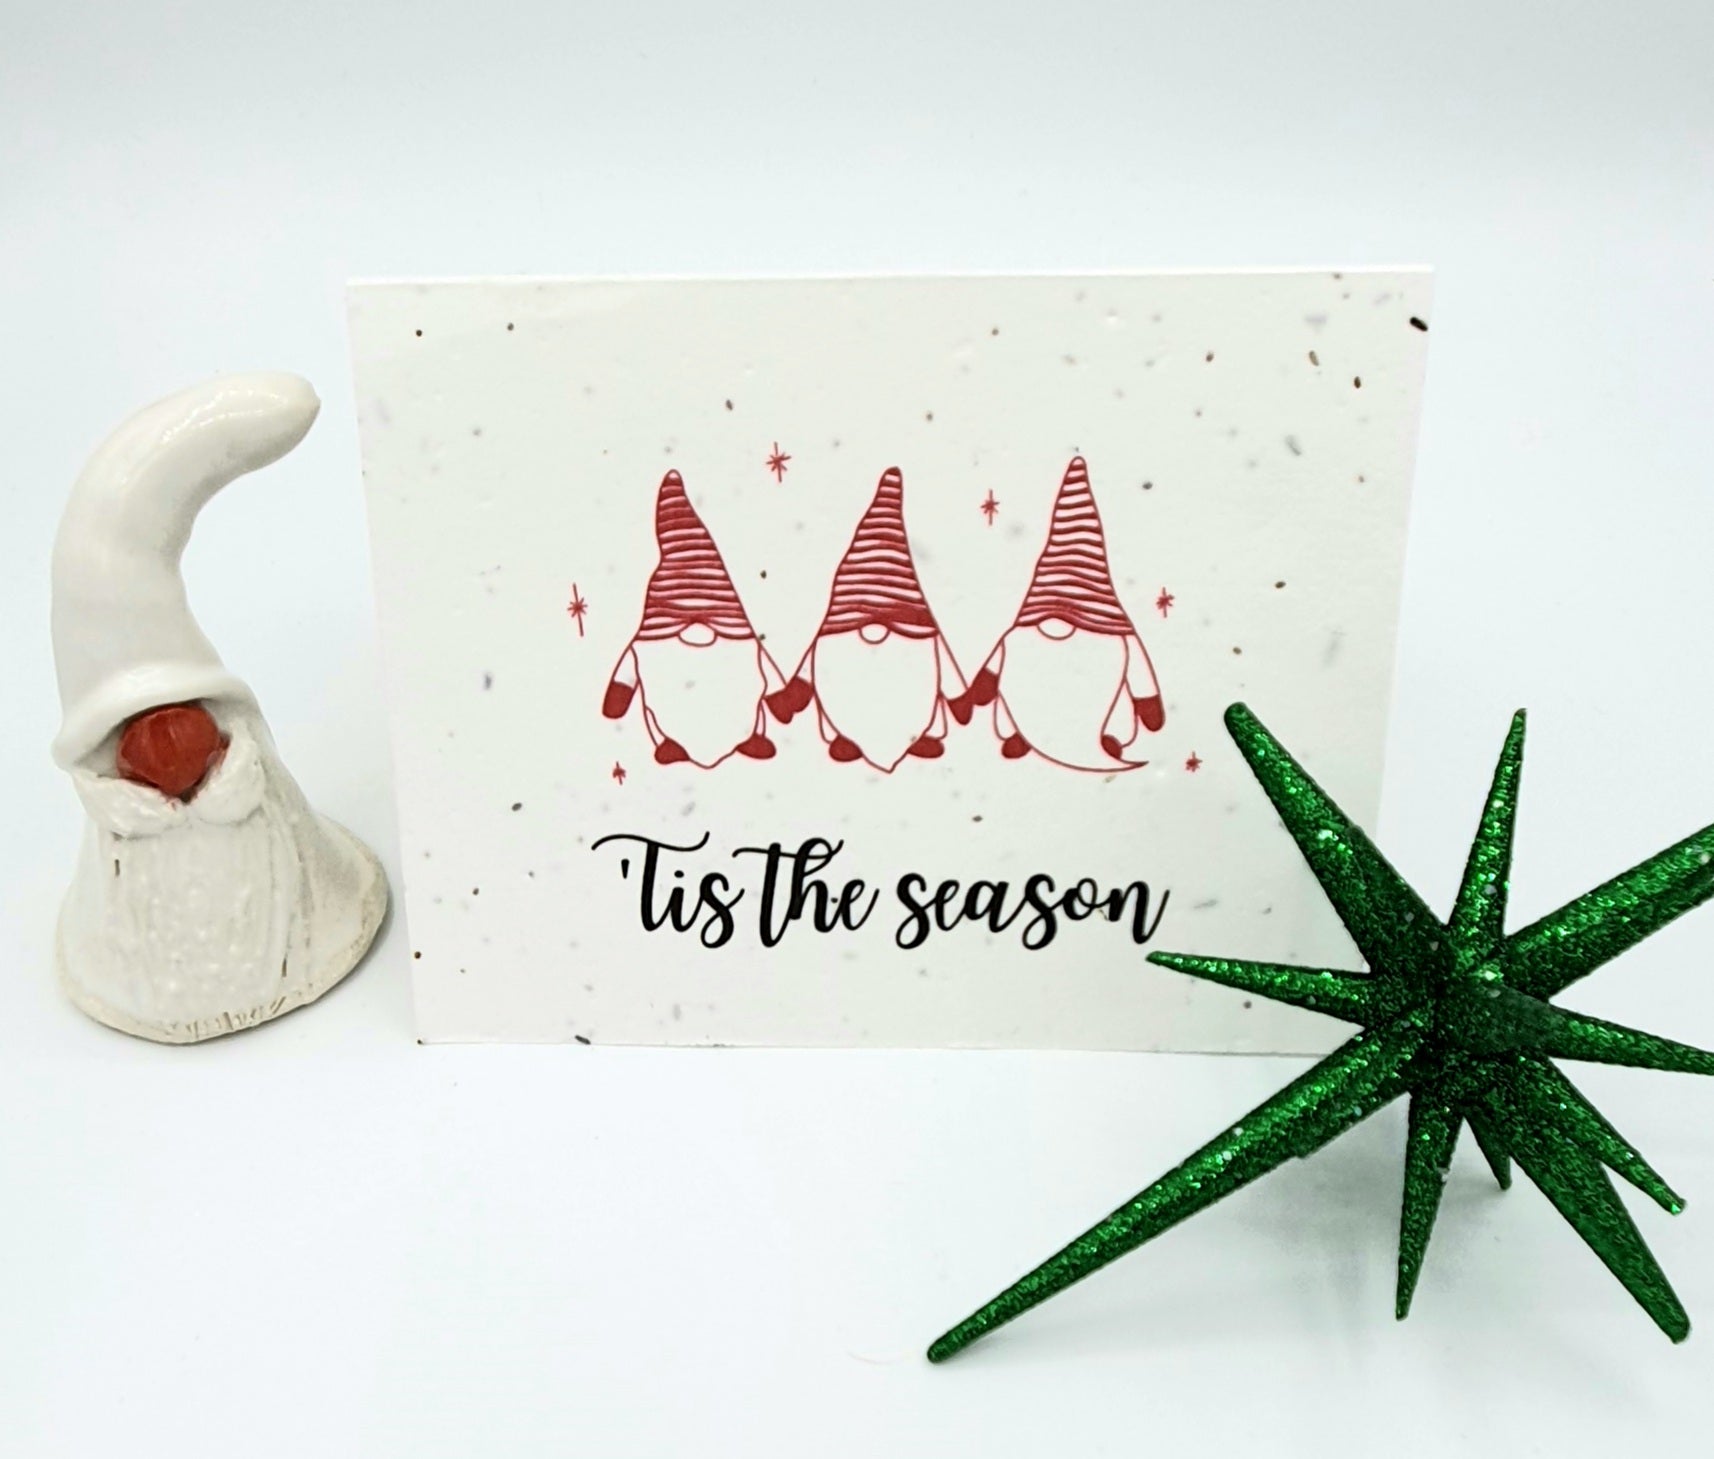 Plantable seed paper card with three red and white gnomes saying Tis the Season.